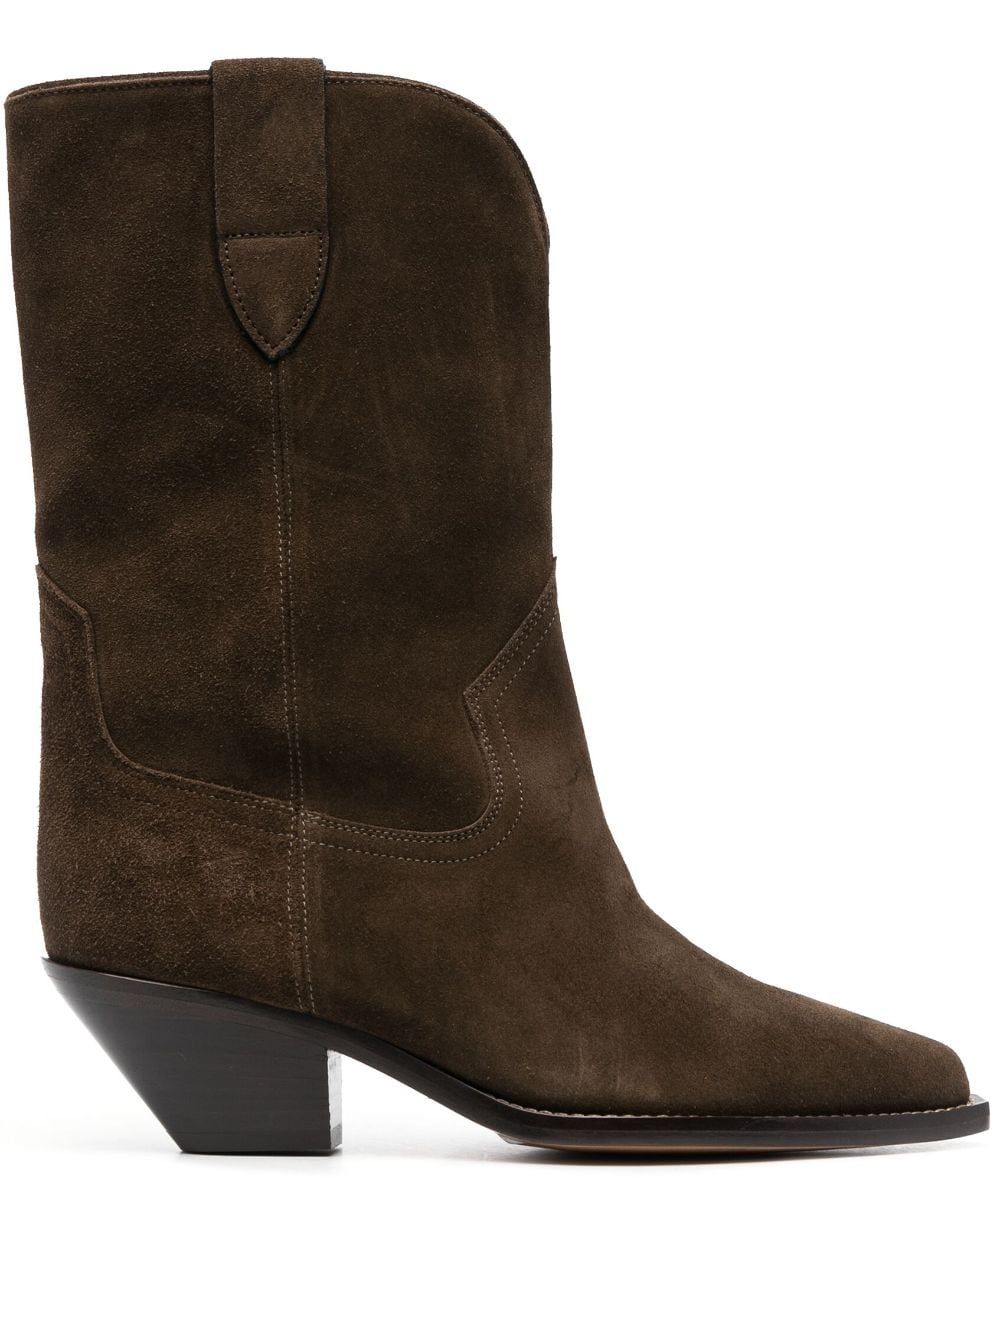 Dahope 60mm suede boots | Farfetch Global